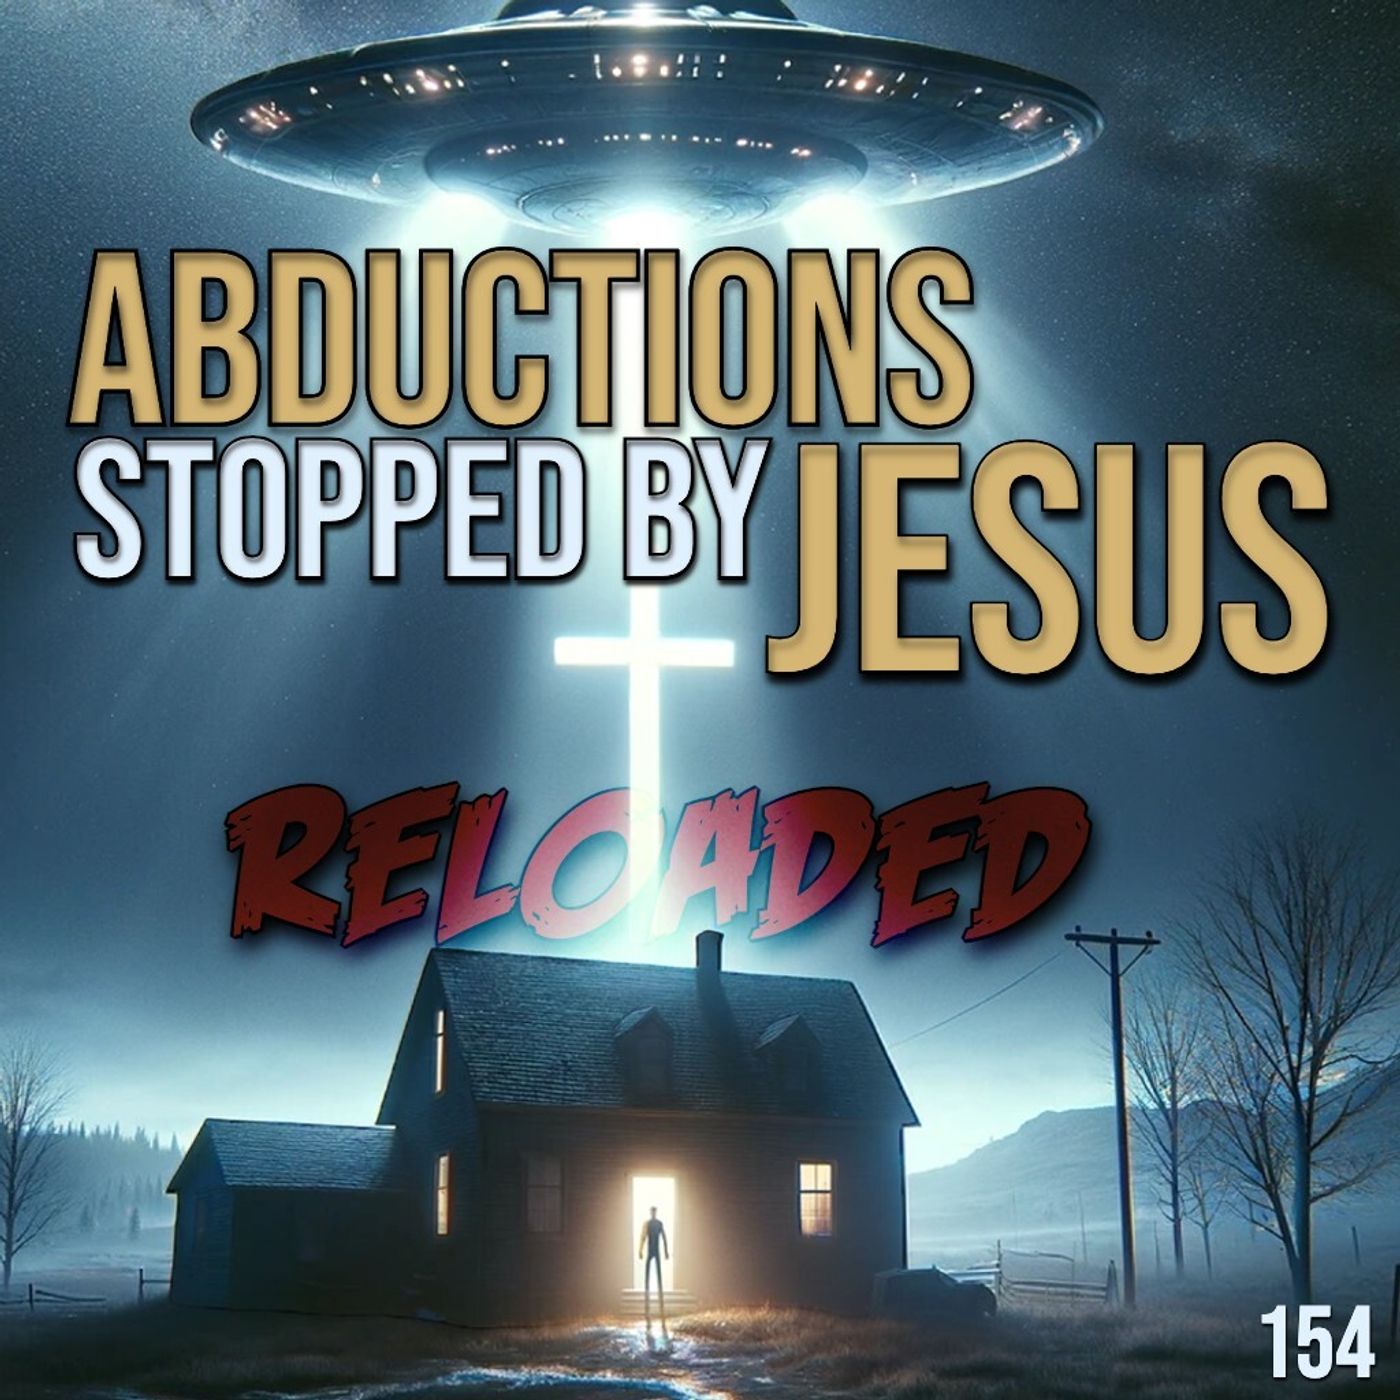 RELOADED | 154: Abductions Stopped By Jesus